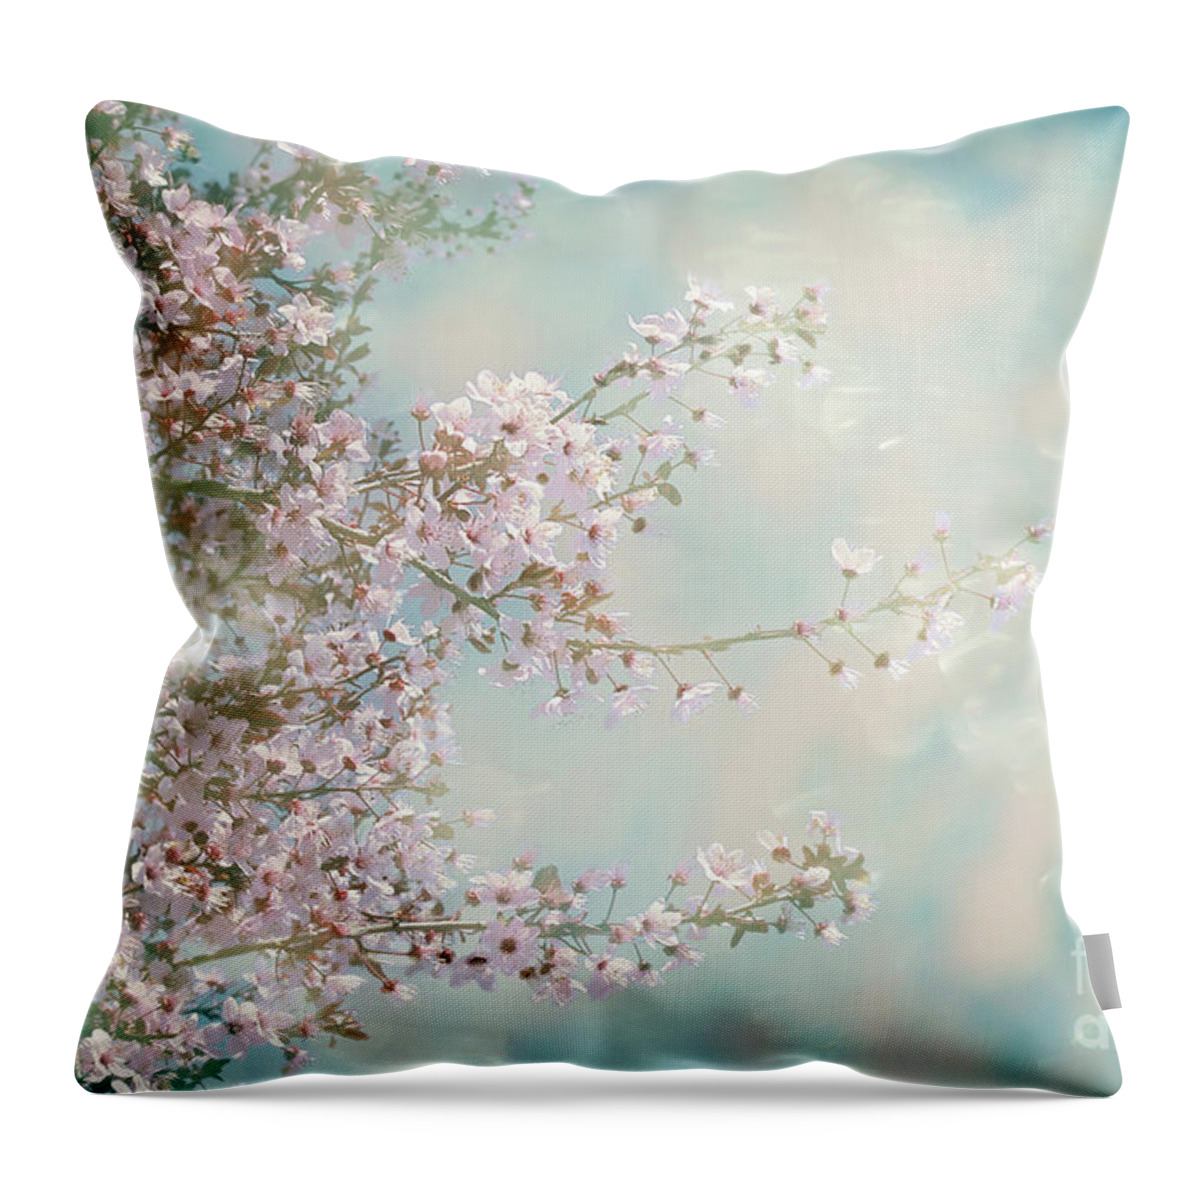 Blossom Throw Pillow featuring the photograph Cherry Blossom Dreams by Linda Lees